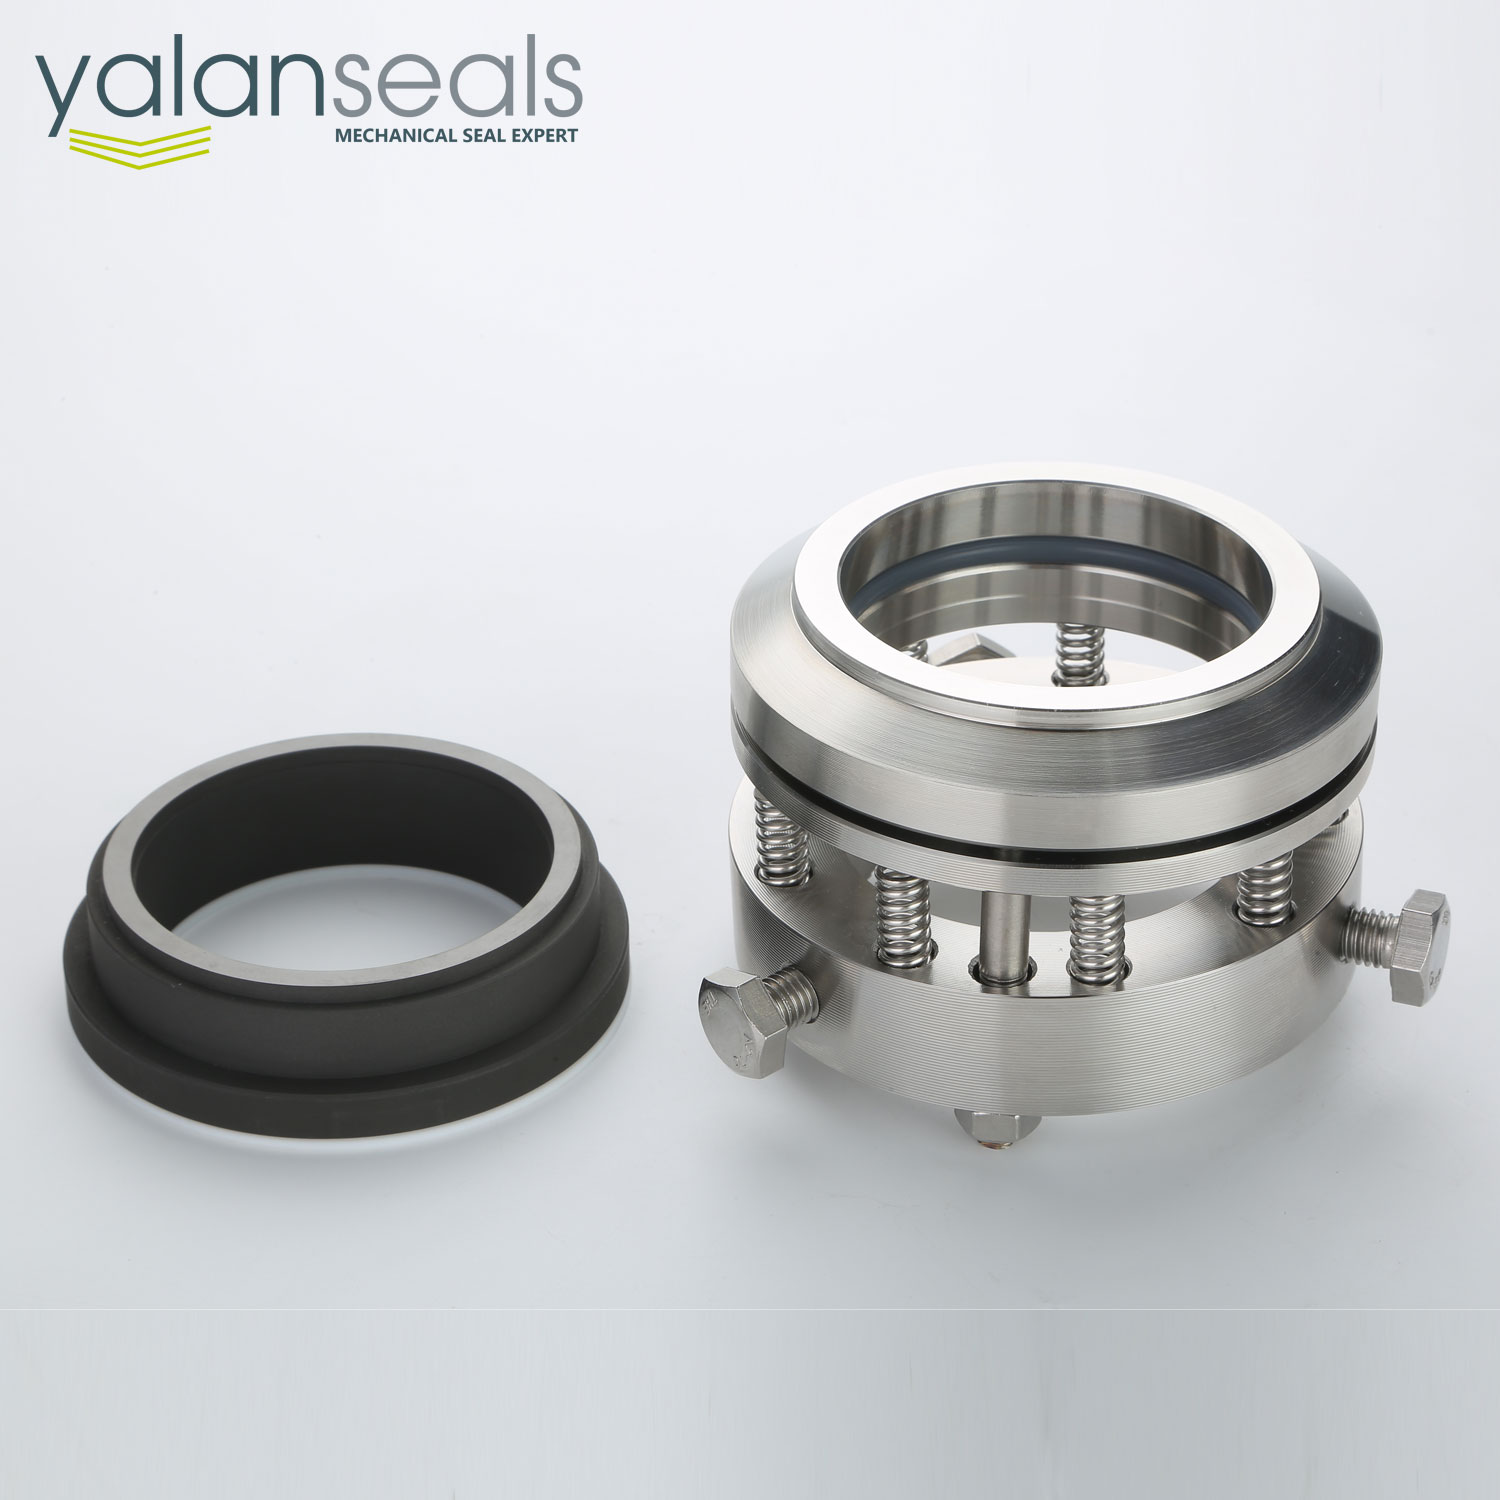 Type 202 Mechanical Seal for Mixers